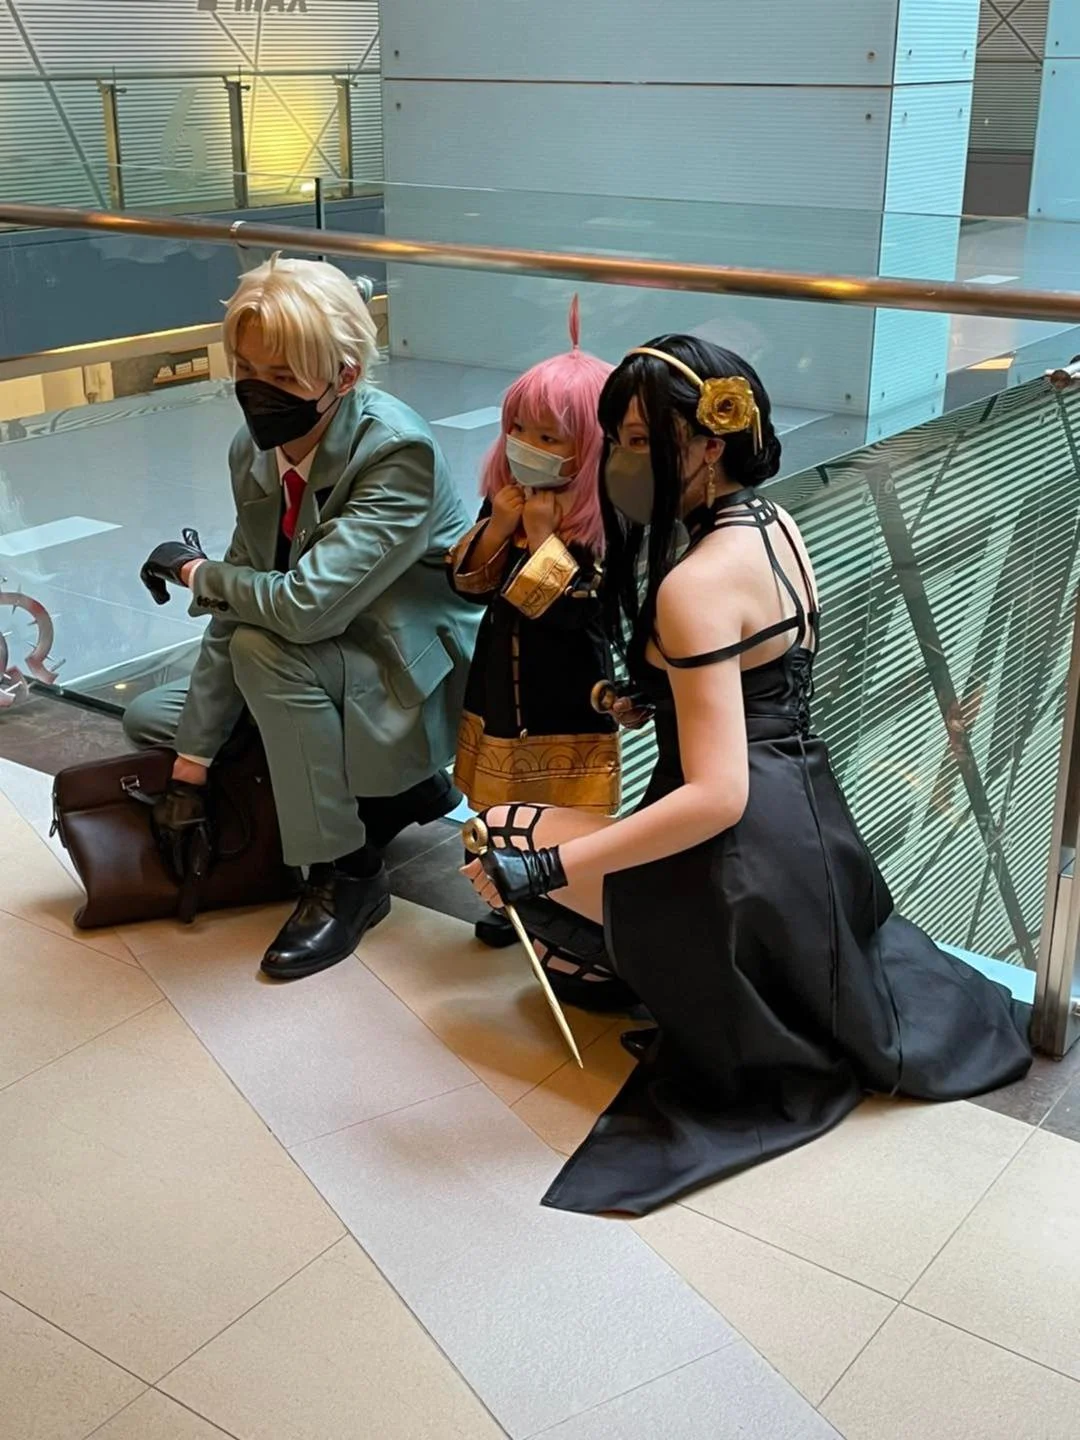 Spy X Family rocking yor forger, anya and loid cosplay